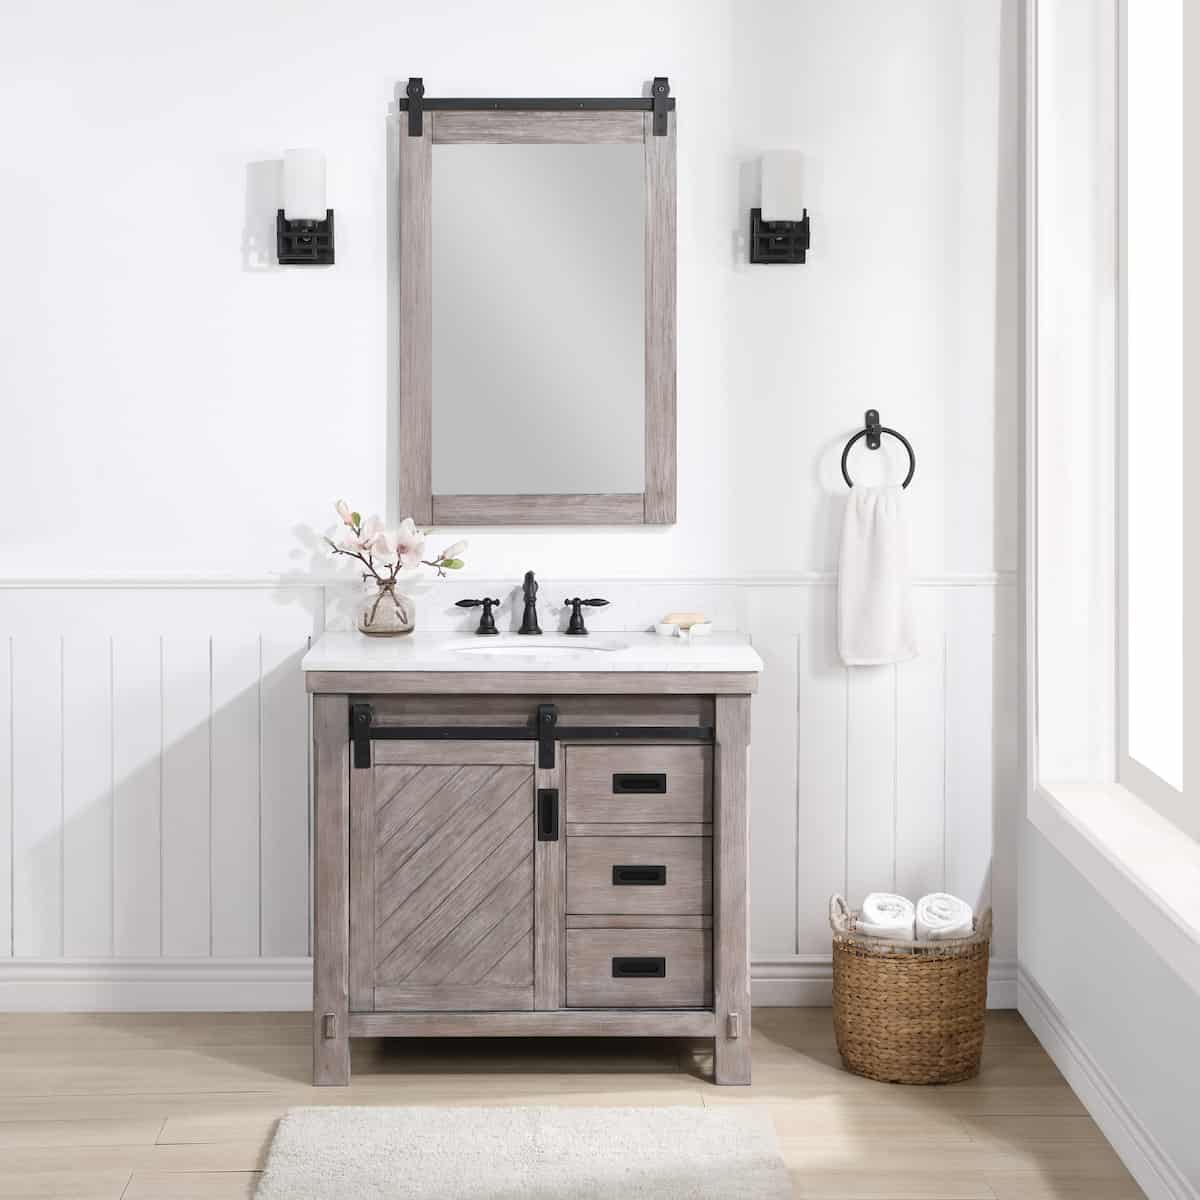 Vinnova Cortes 36 Inch Freestanding Single Sink Bath Vanity in Classical Grey with White Composite Countertop With Mirror in Bathroom 701736-CR-WS